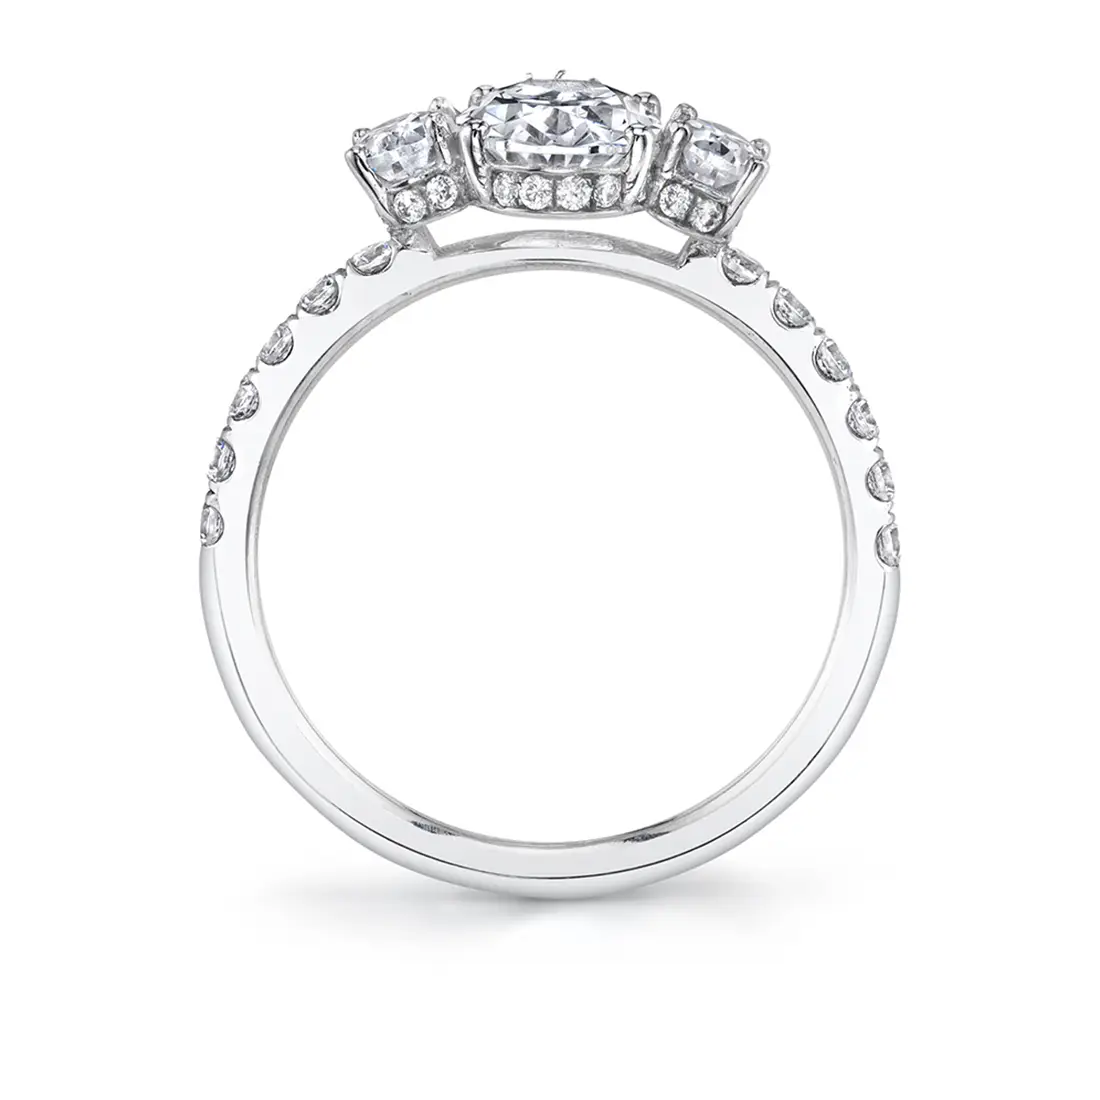 Oval Cut Three Stone Engagement Ring with Oval Sides - Tasya